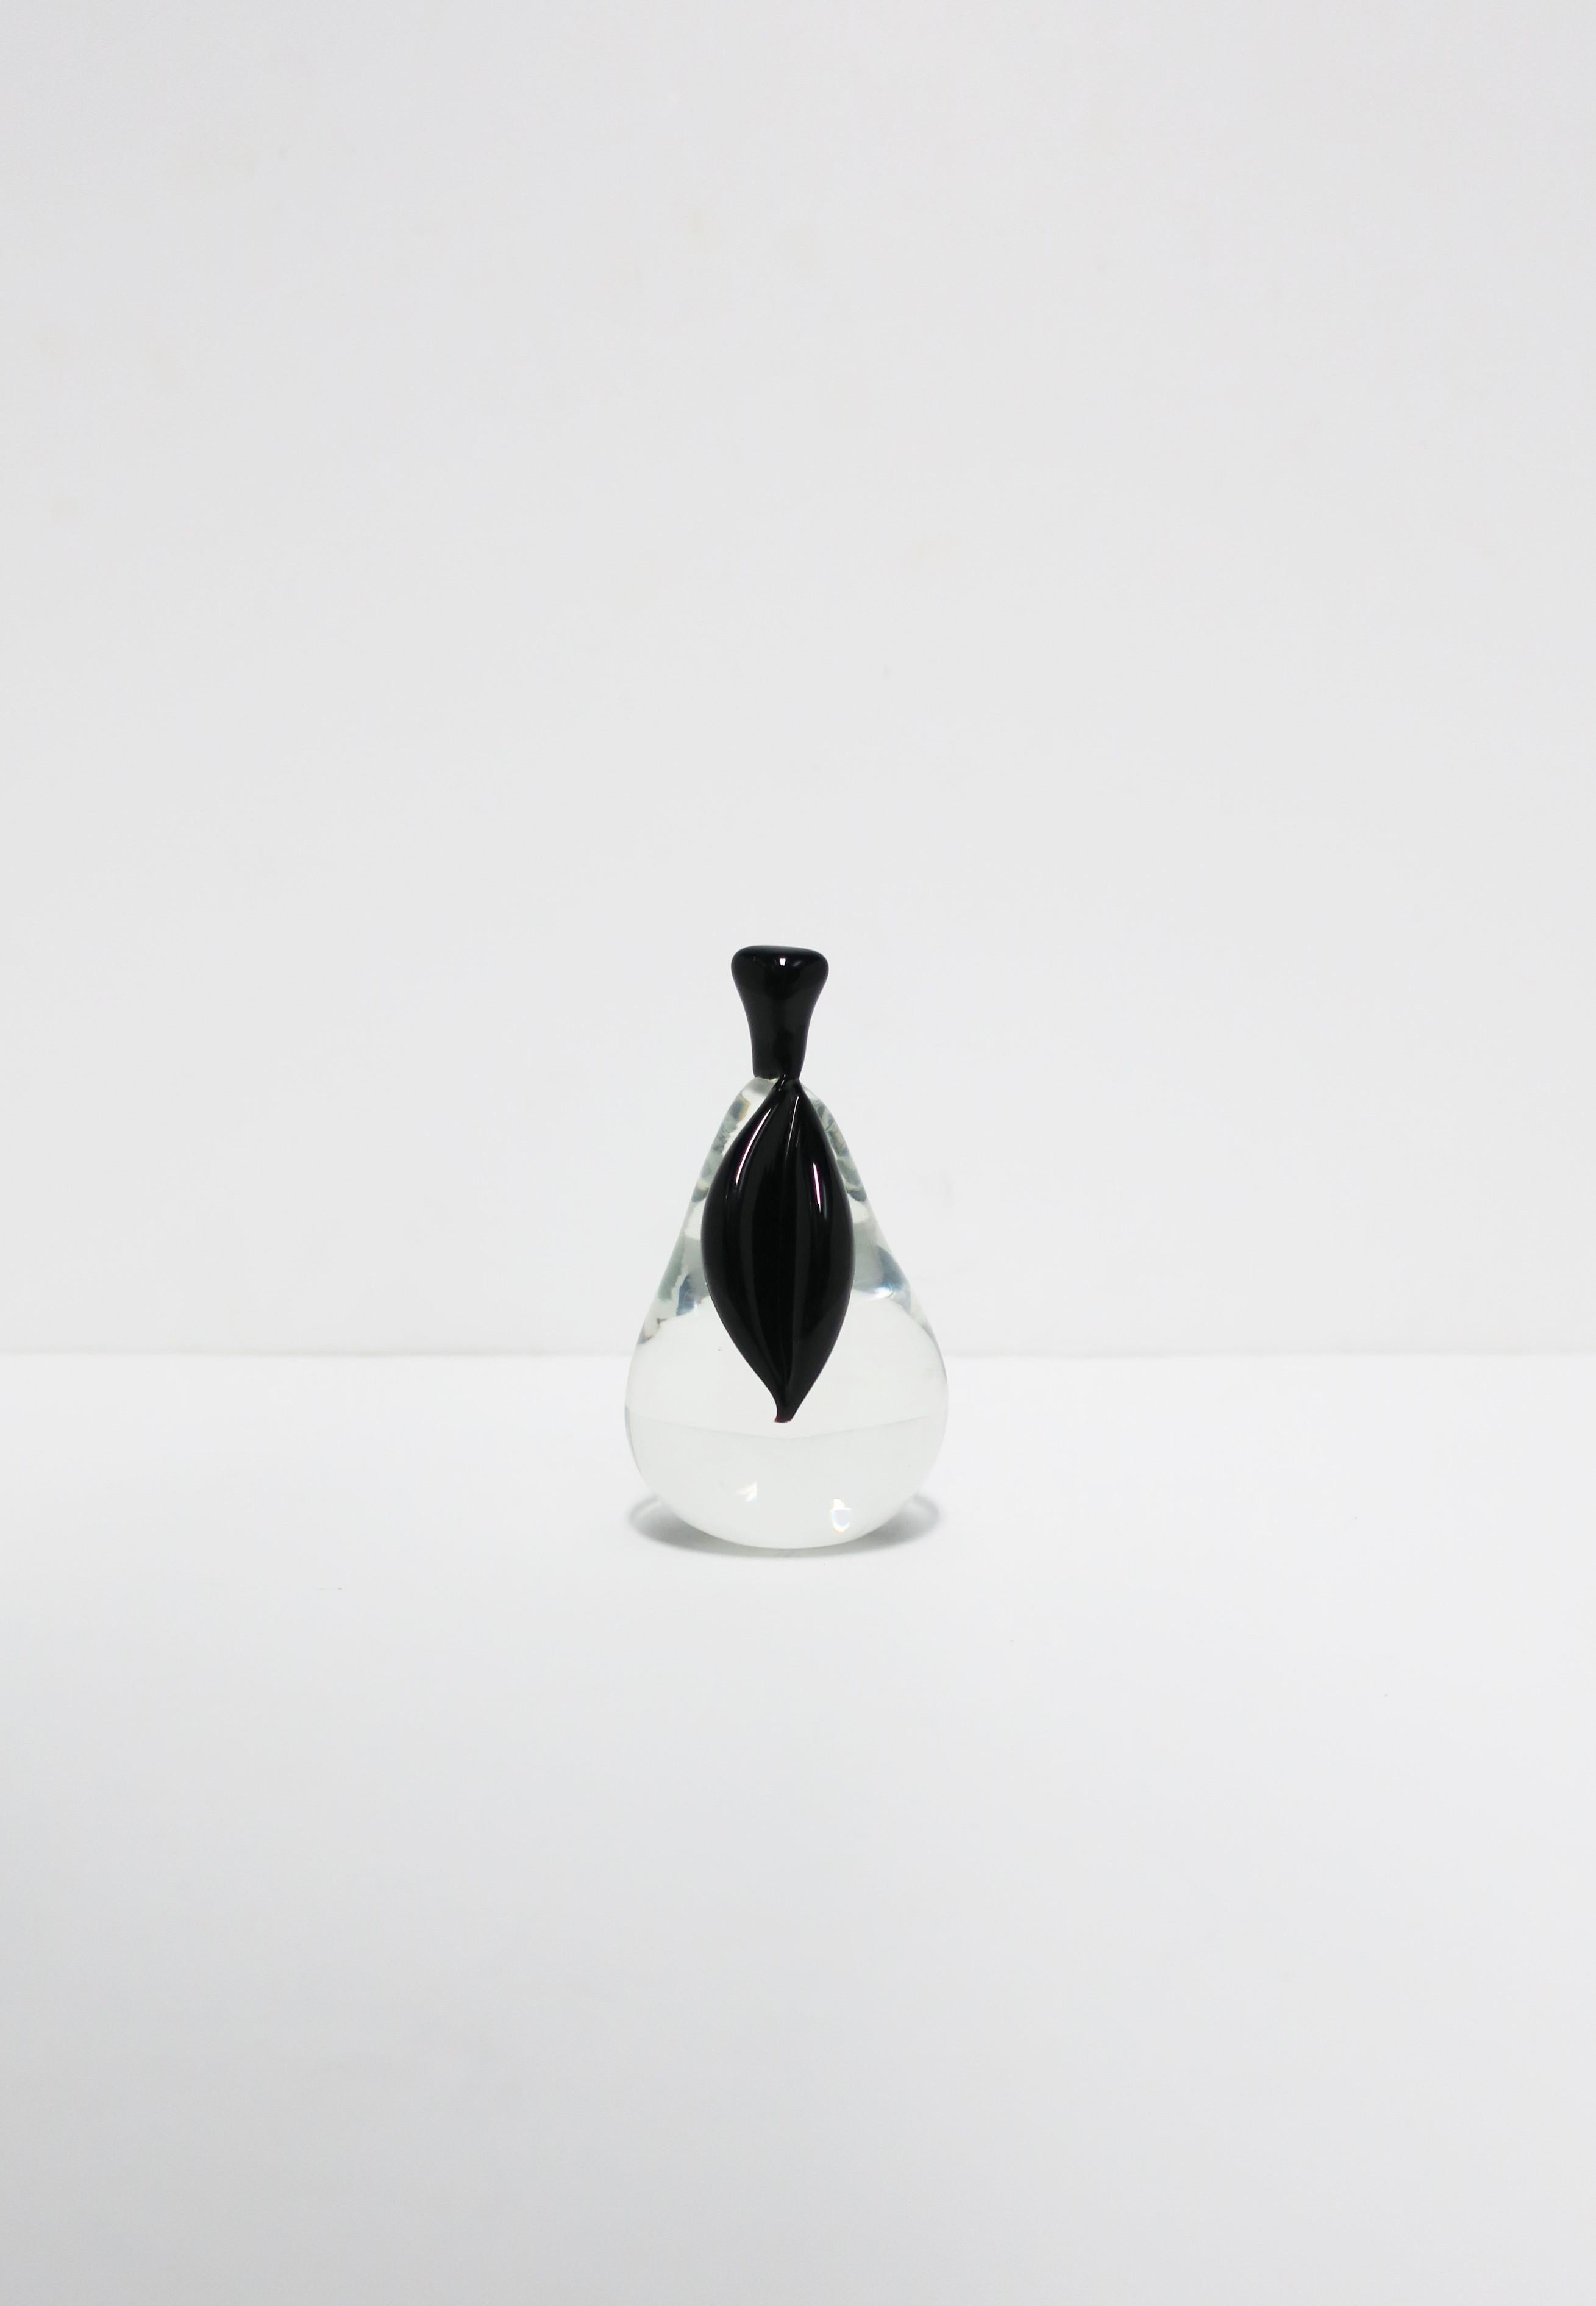 A beautiful Italian Murano art glass pear fruit sculpture by Archimede Seguso, Murano, Italy, circa mid-20th century. This beautifully designed and handcrafted pear fruit sculpture in clear transparent with a black leaf and stem. Piece is marked